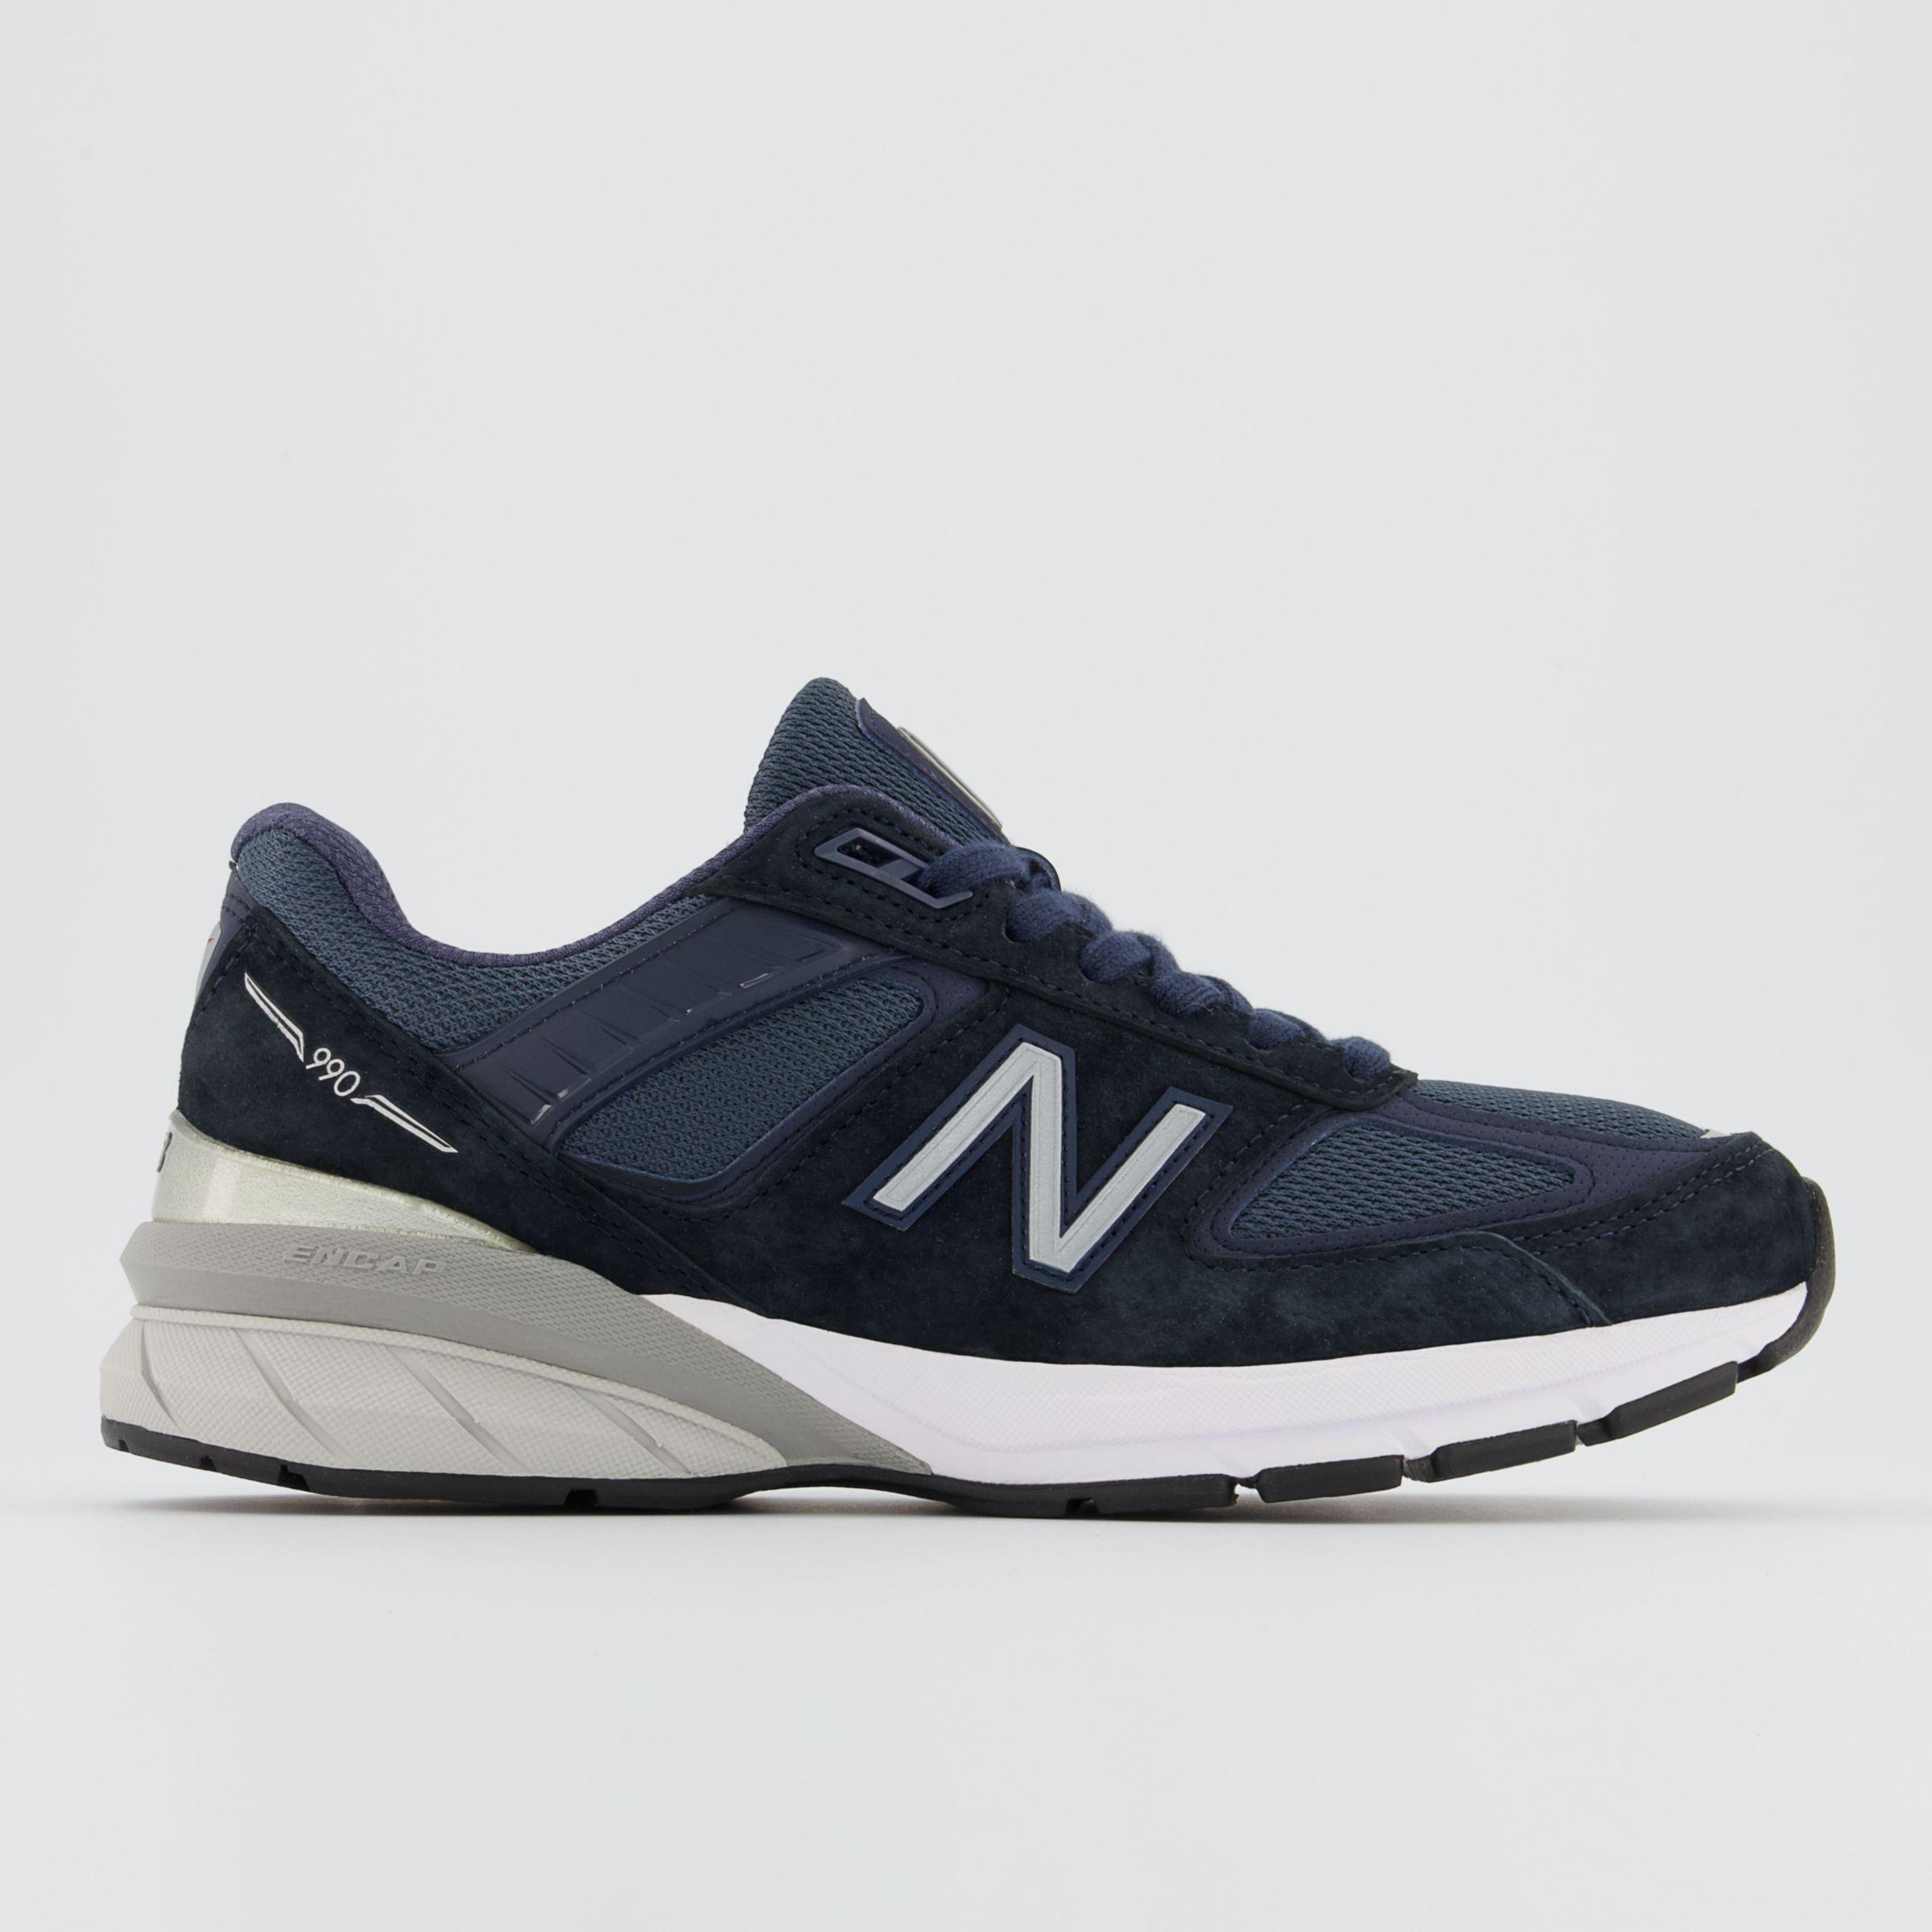 New Balance Leather 990v5 Low-top sneakers in Navy/Silver (Blue ...